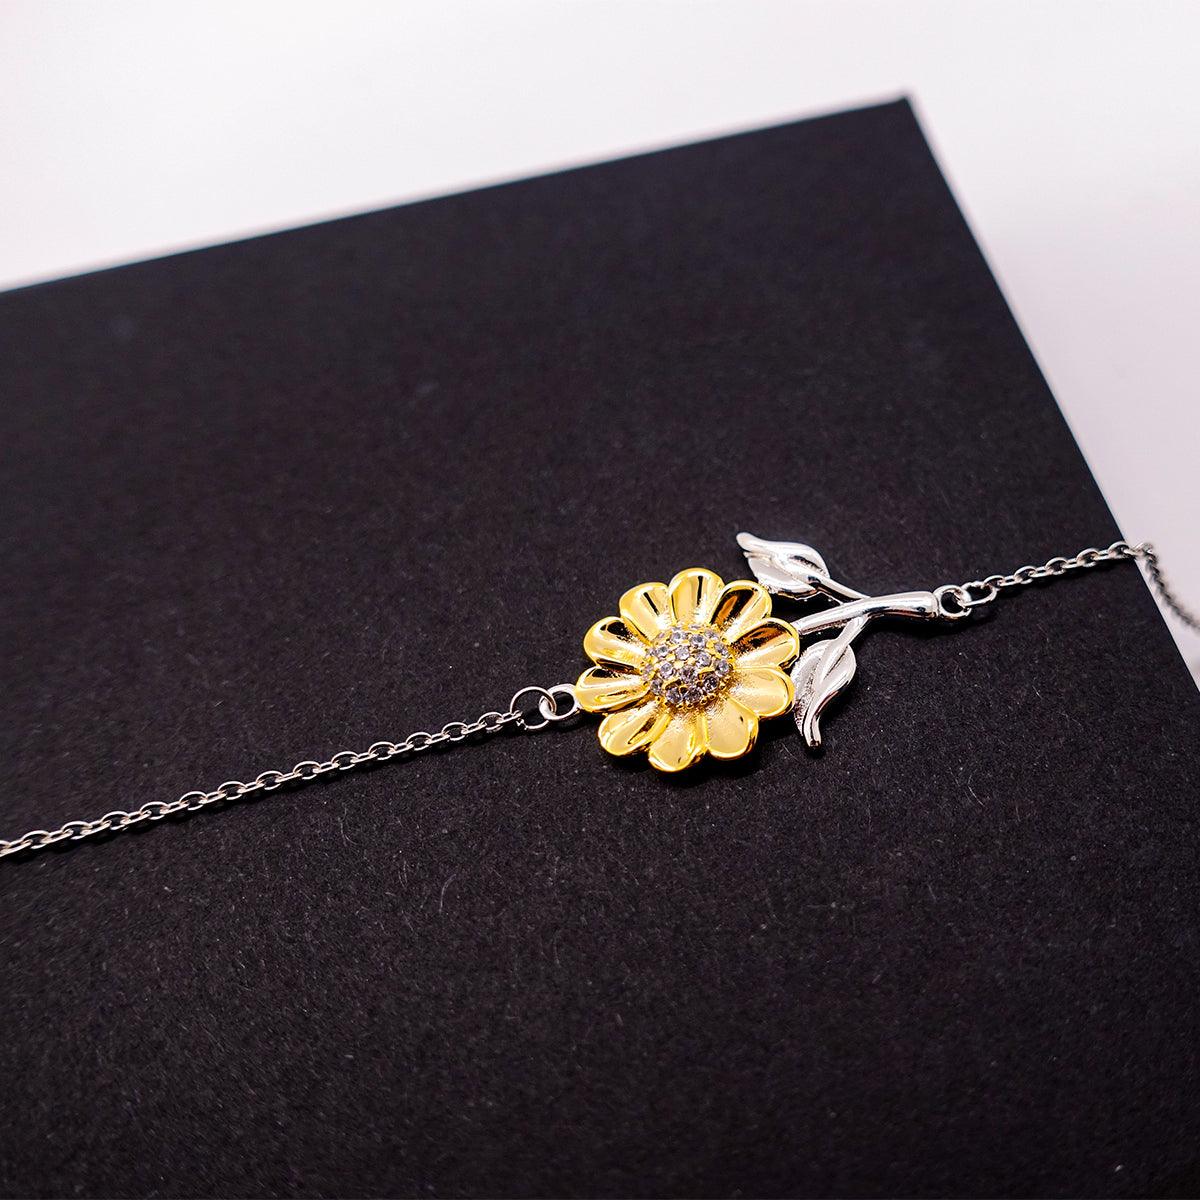 Remarkable Parking Lot Attendant Gifts, Your dedication and hard work, Inspirational Birthday Christmas Unique Sunflower Bracelet For Parking Lot Attendant, Coworkers, Men, Women, Friends - Mallard Moon Gift Shop